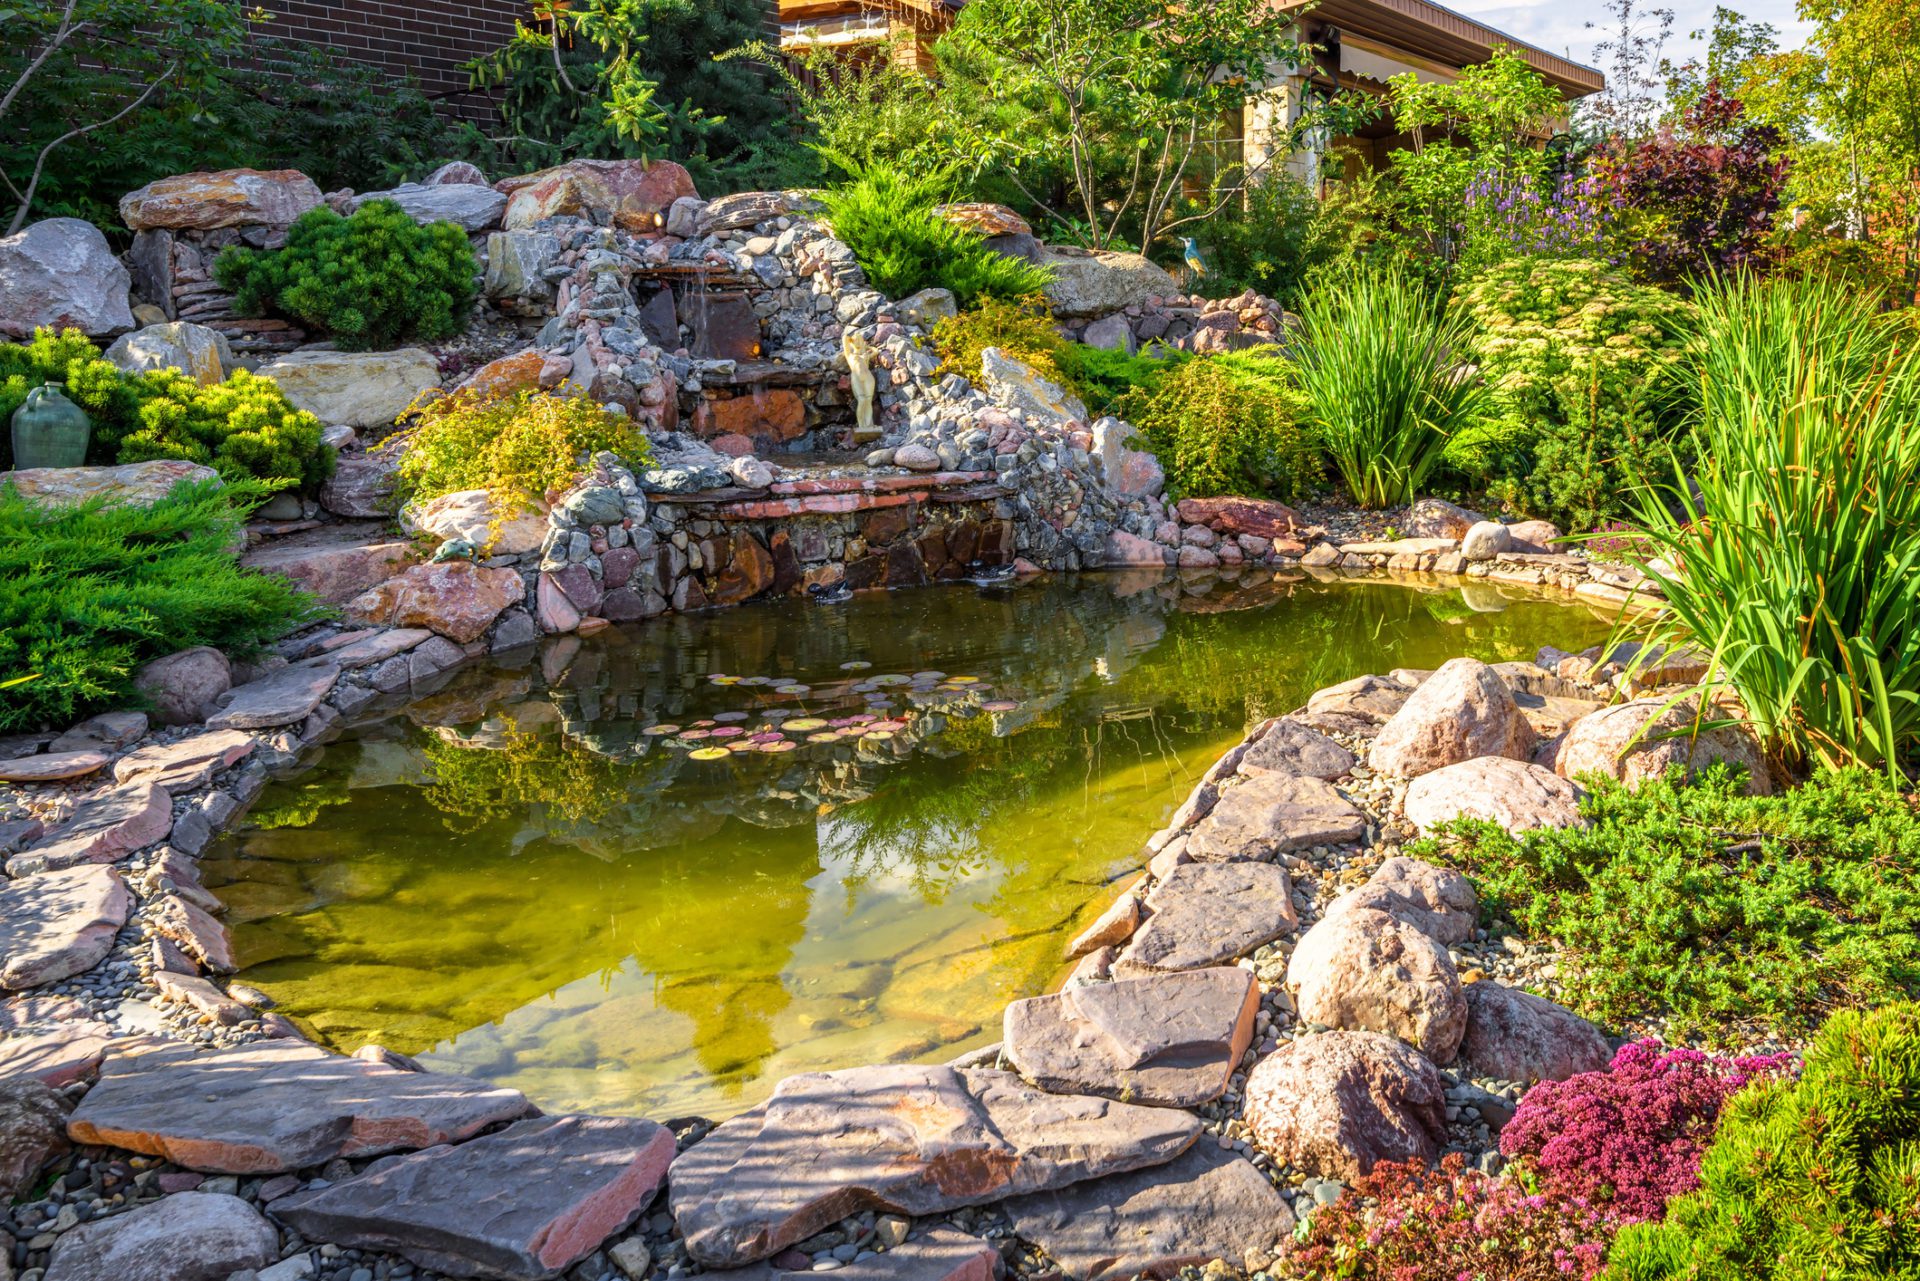 Things to consider when installing an outdoor water feature - All Metro Companies 